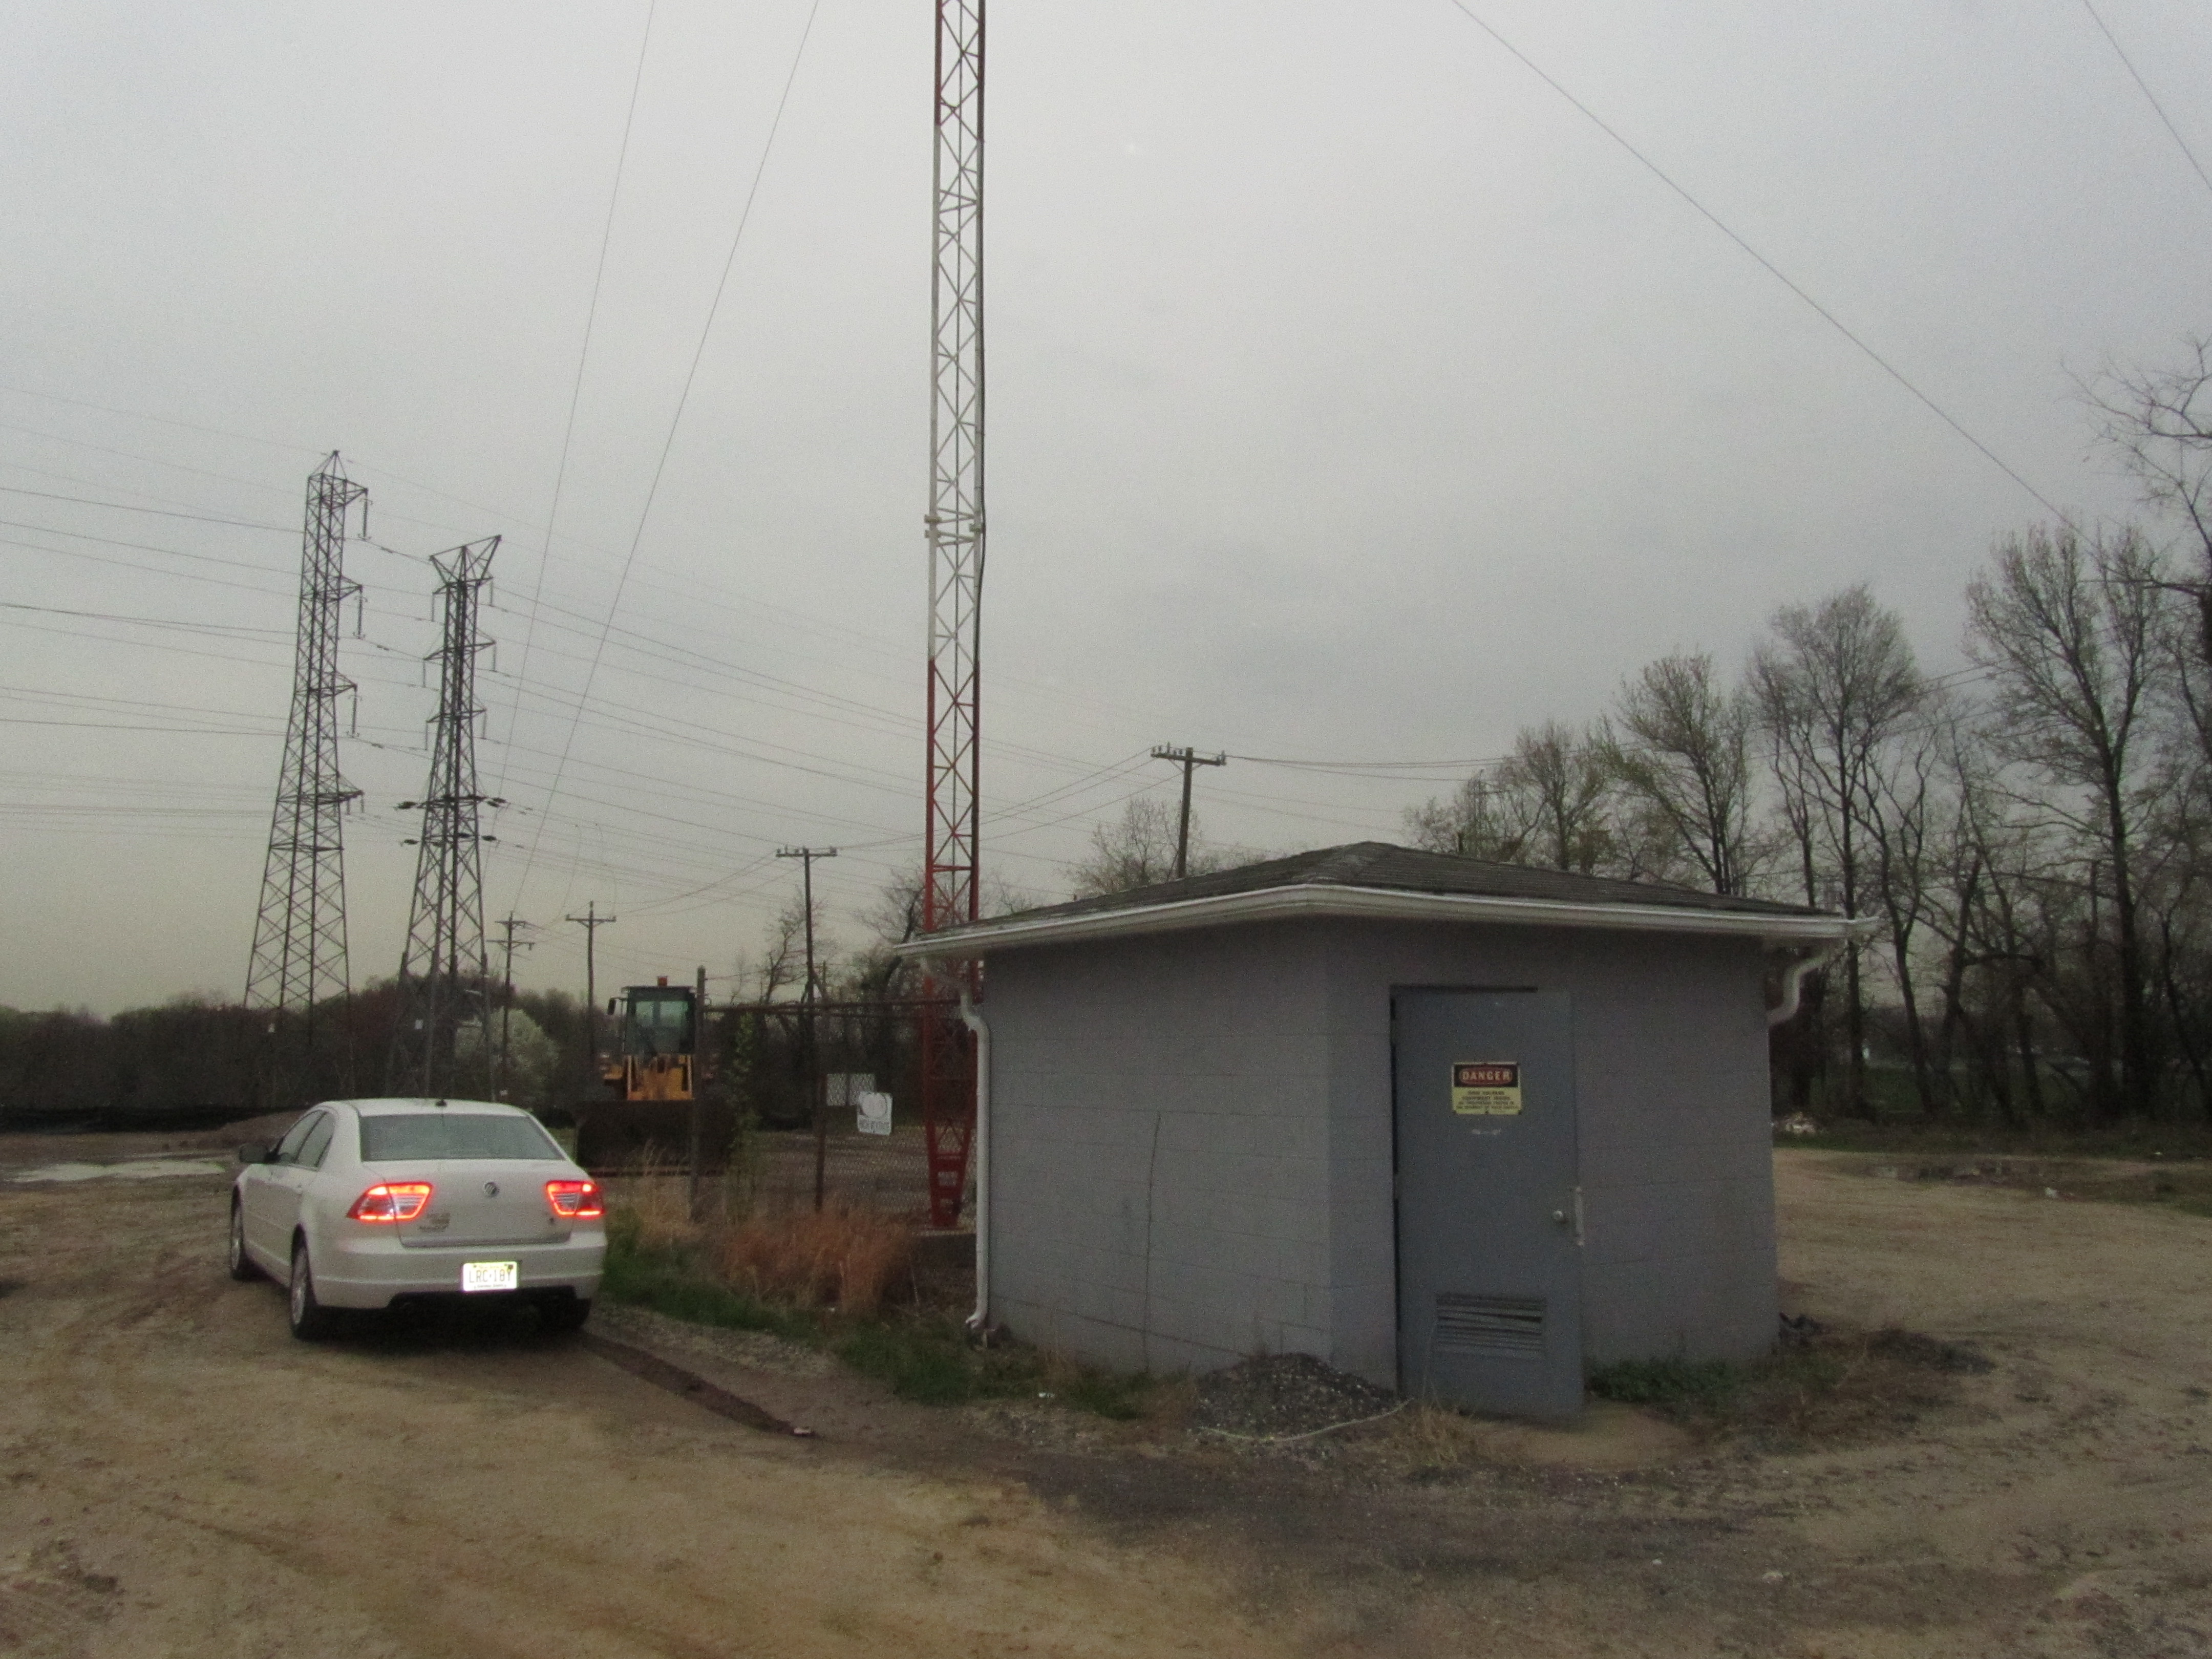 2010 - The Transmitter Building